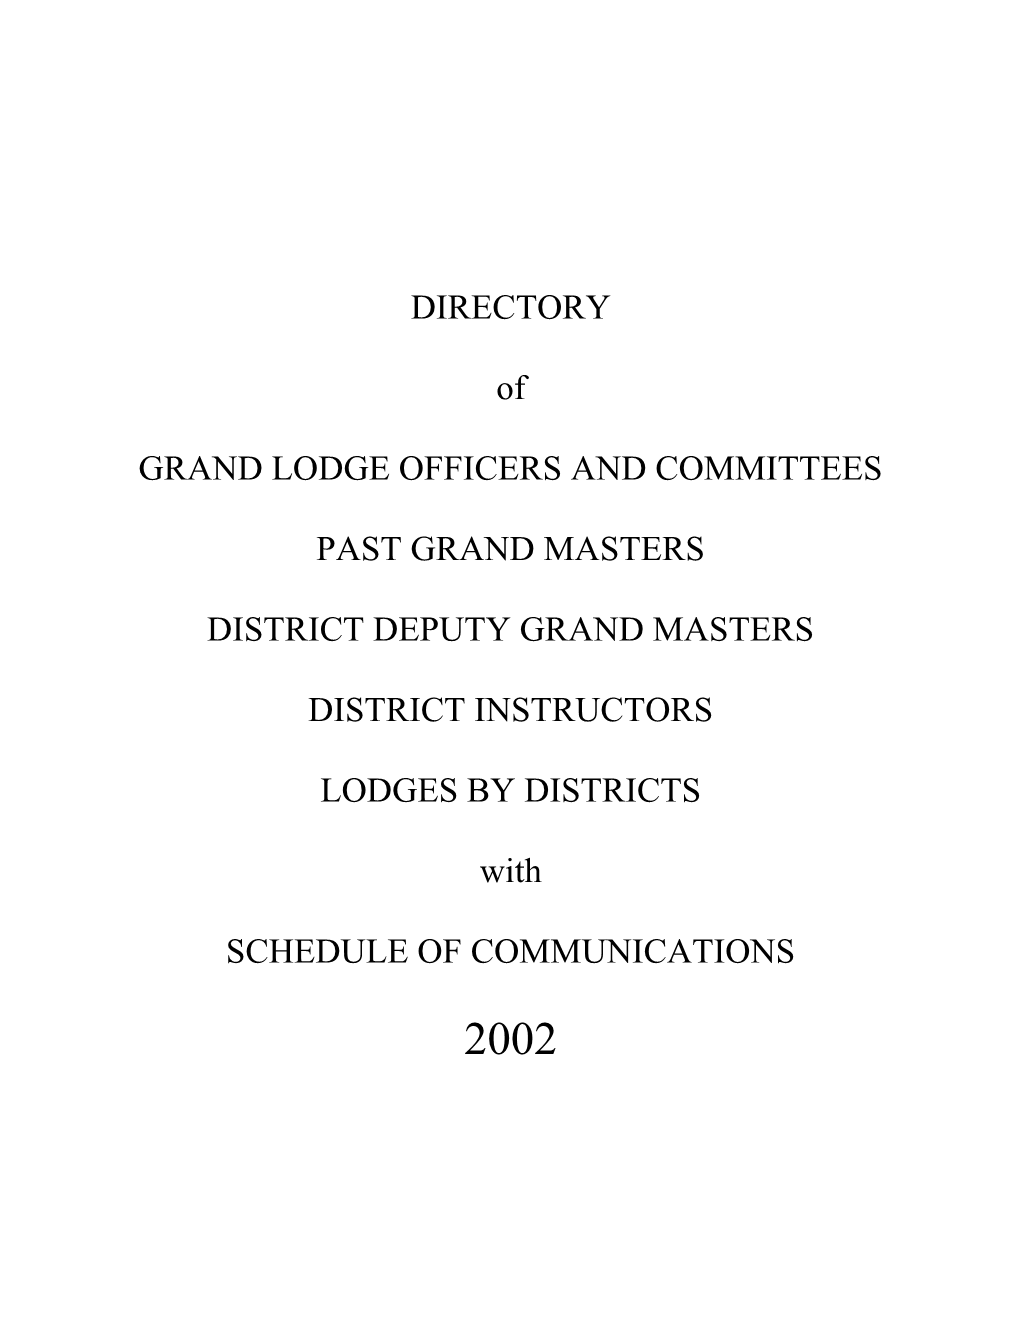 Grand Lodge Officers and Committees